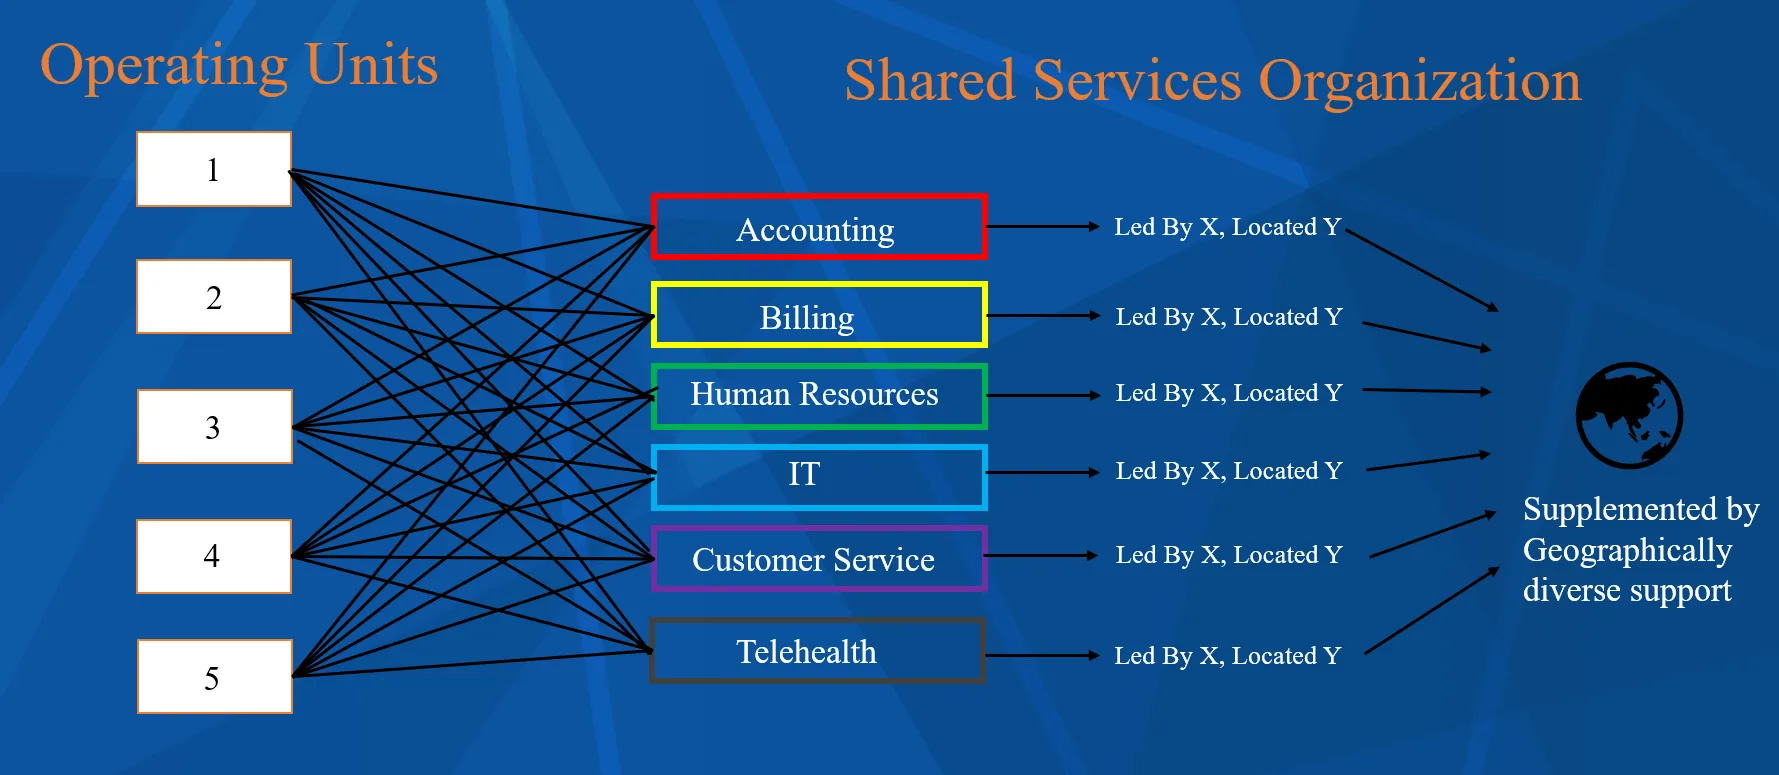 Shared Services